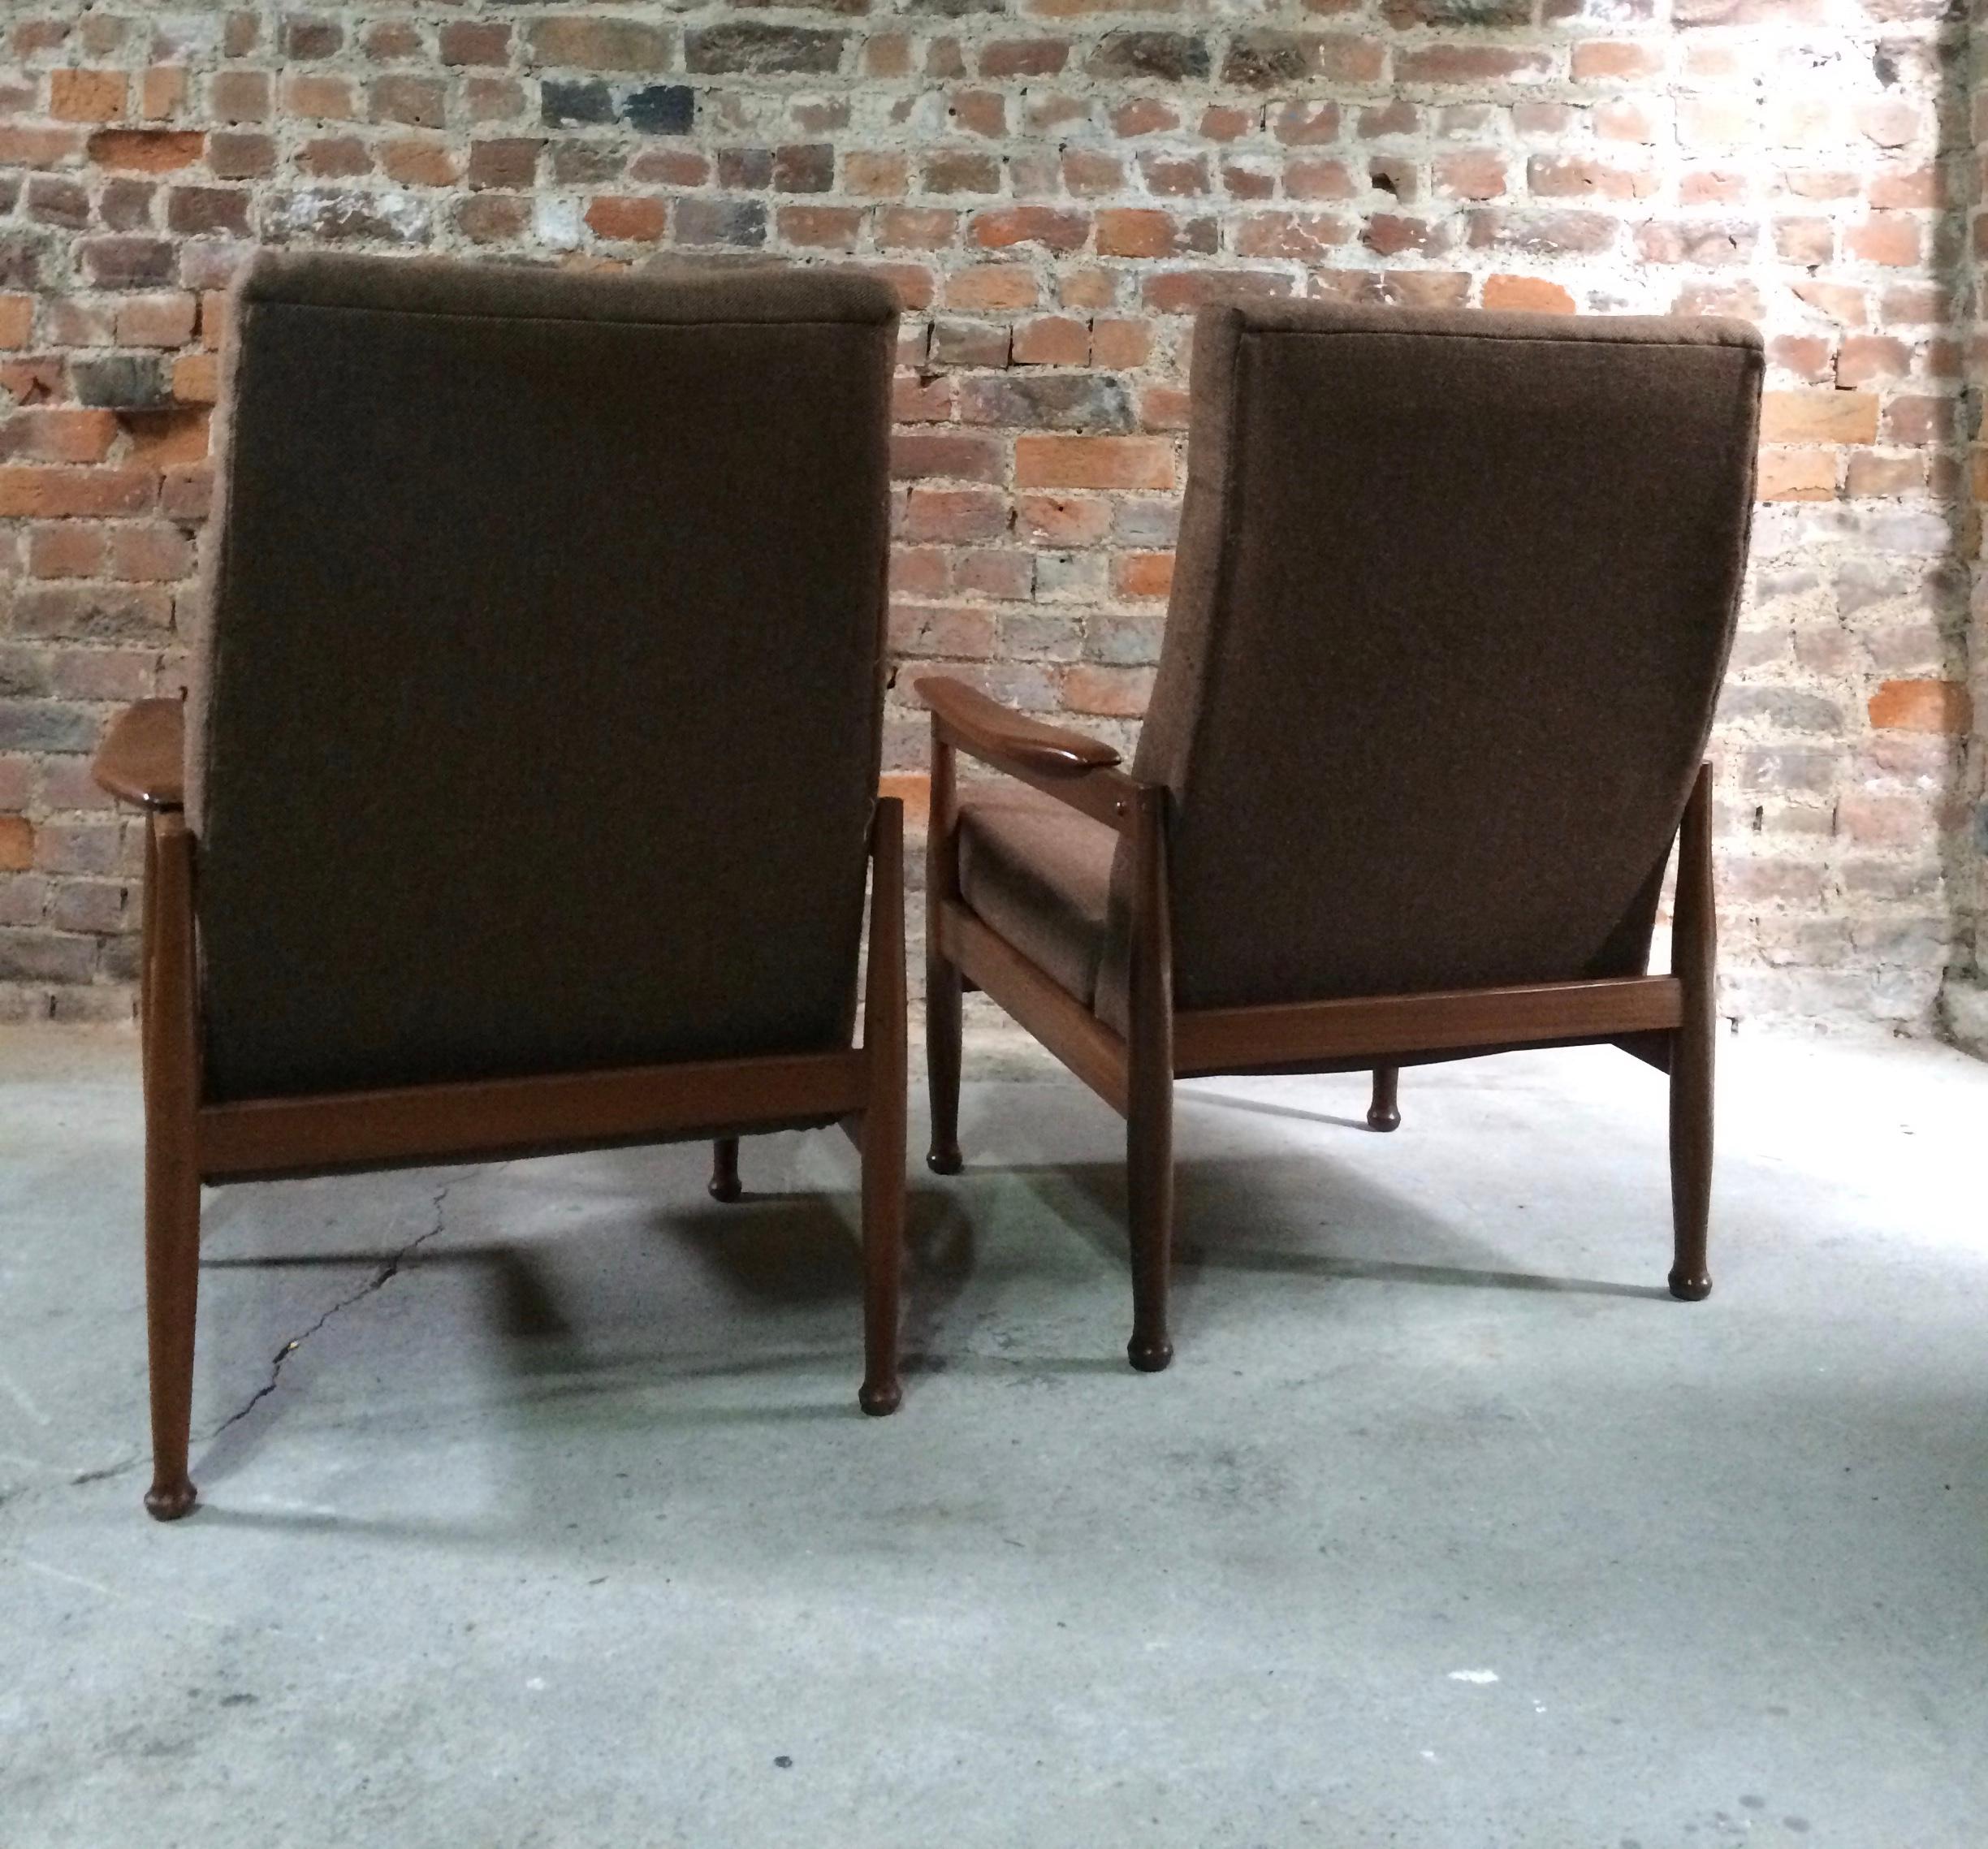 Magnificent Pair of Guy Rogers Style Teak Recliner Armchairs Manhattan Design 6